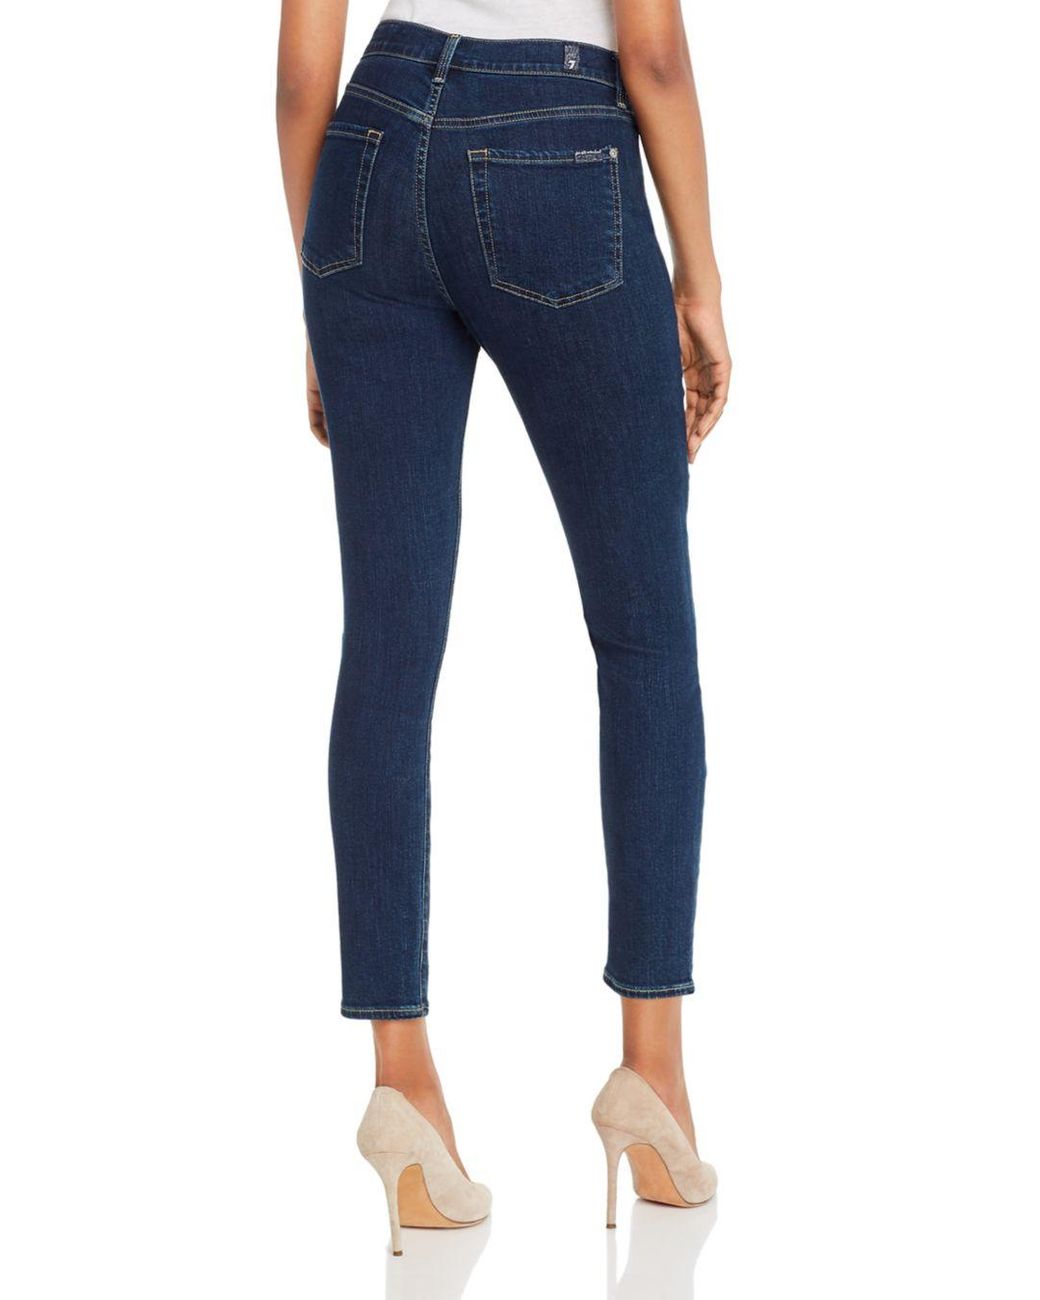 Ankle Skinny Jeans in Fate Air 7 For All Mankind Womens B